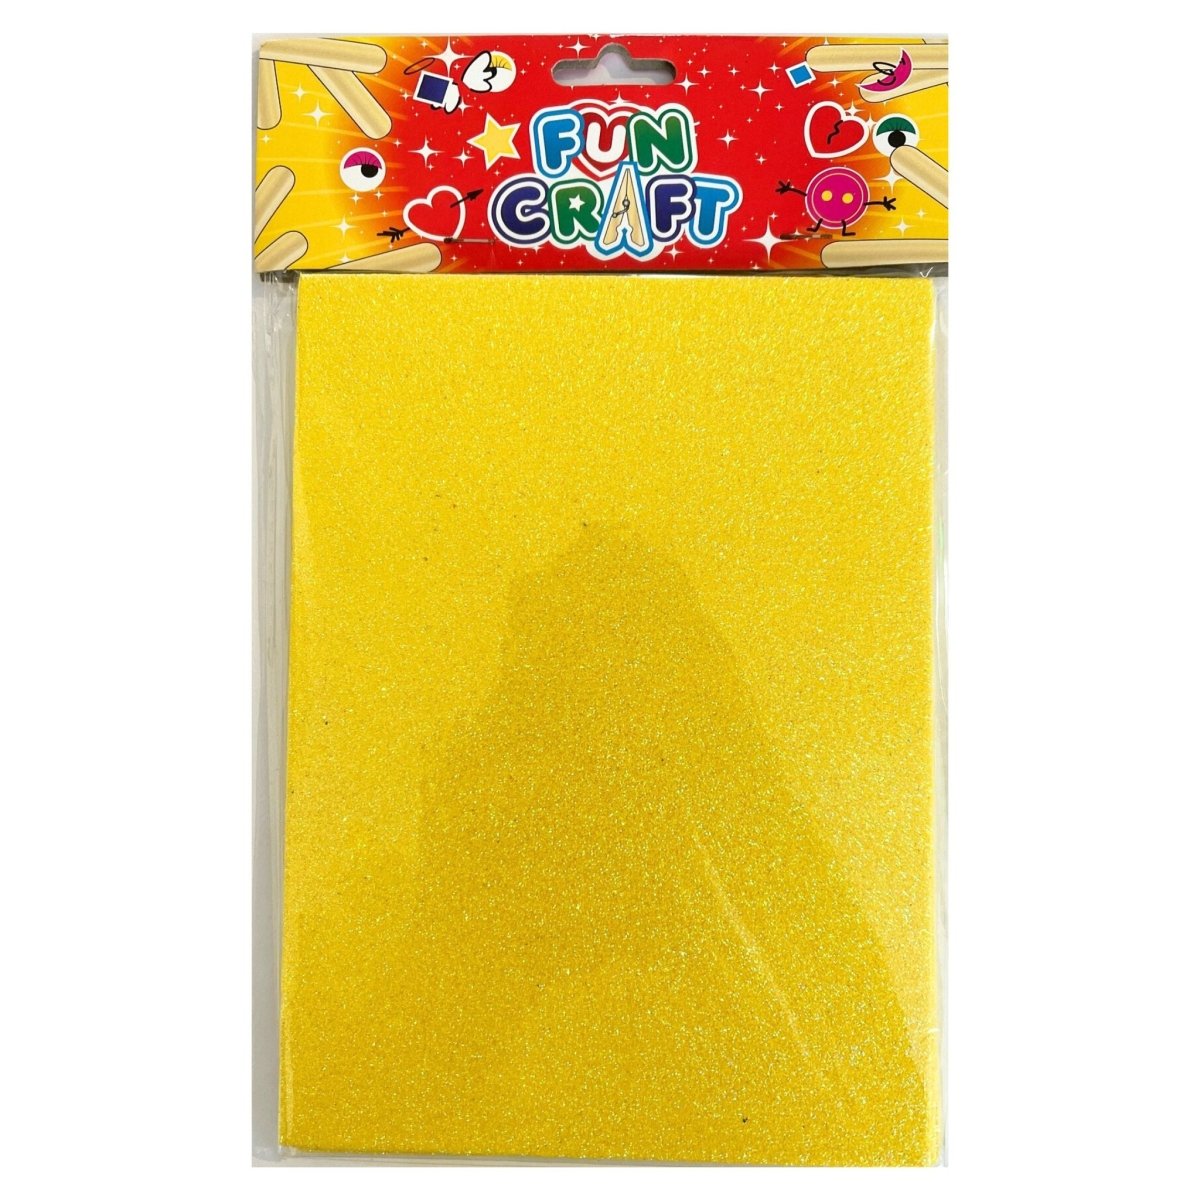 Glitter Board 4 Pack - Yellow - Kids Party Craft